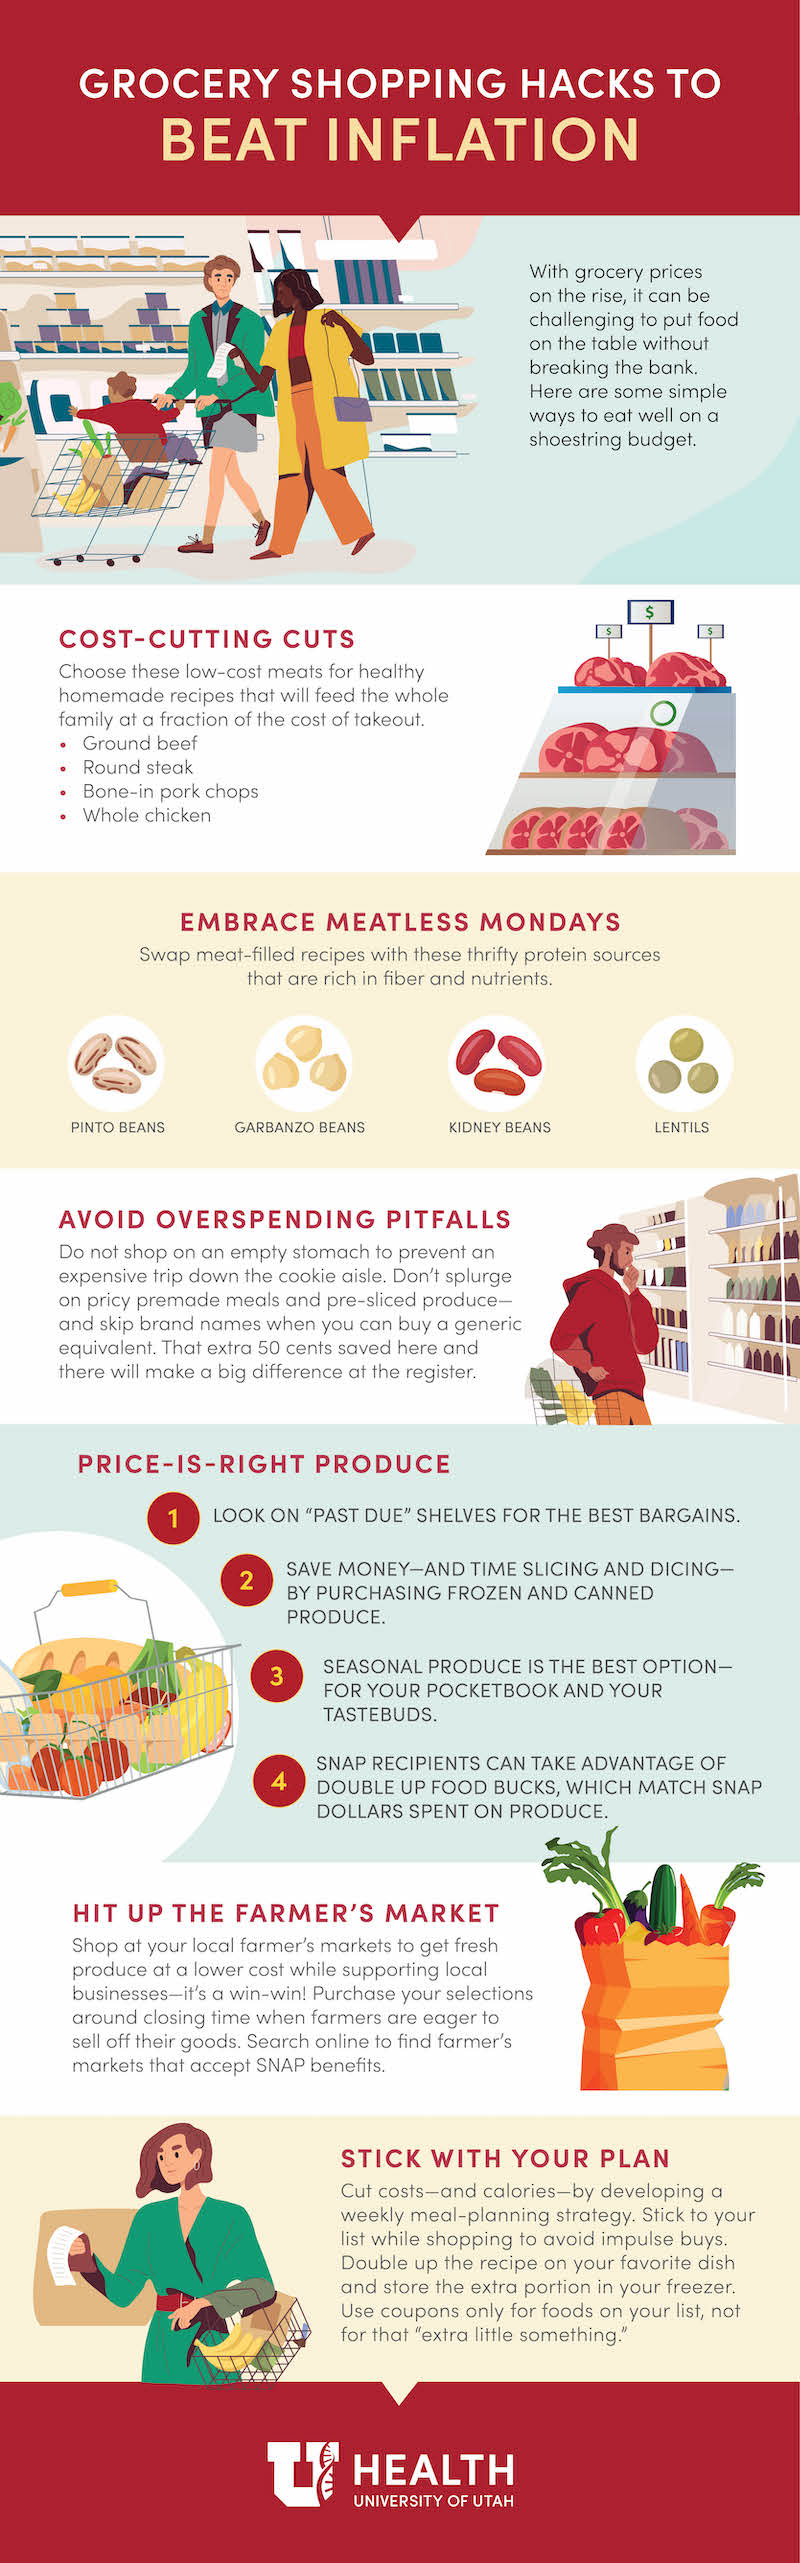 Infographic explains how to plan a healthy meal for your family on a tight budget.